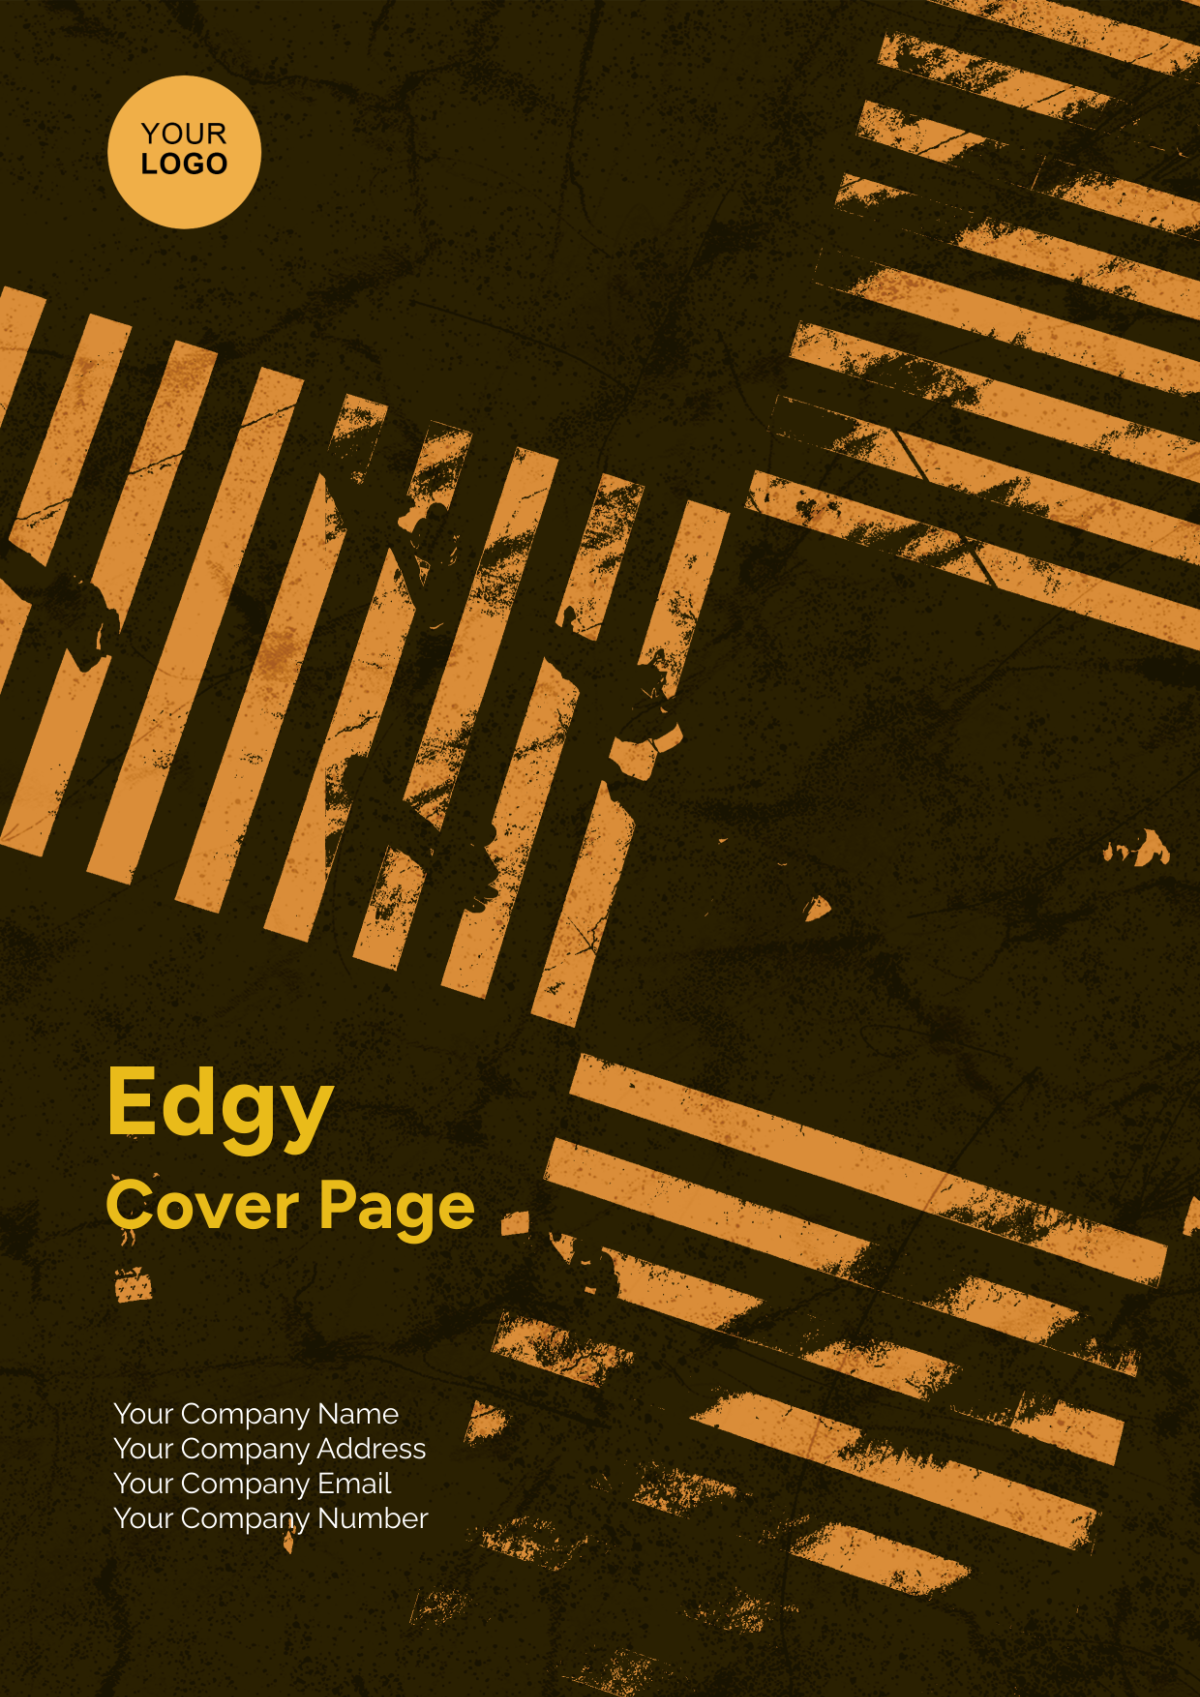 Edgy Cover Page Design